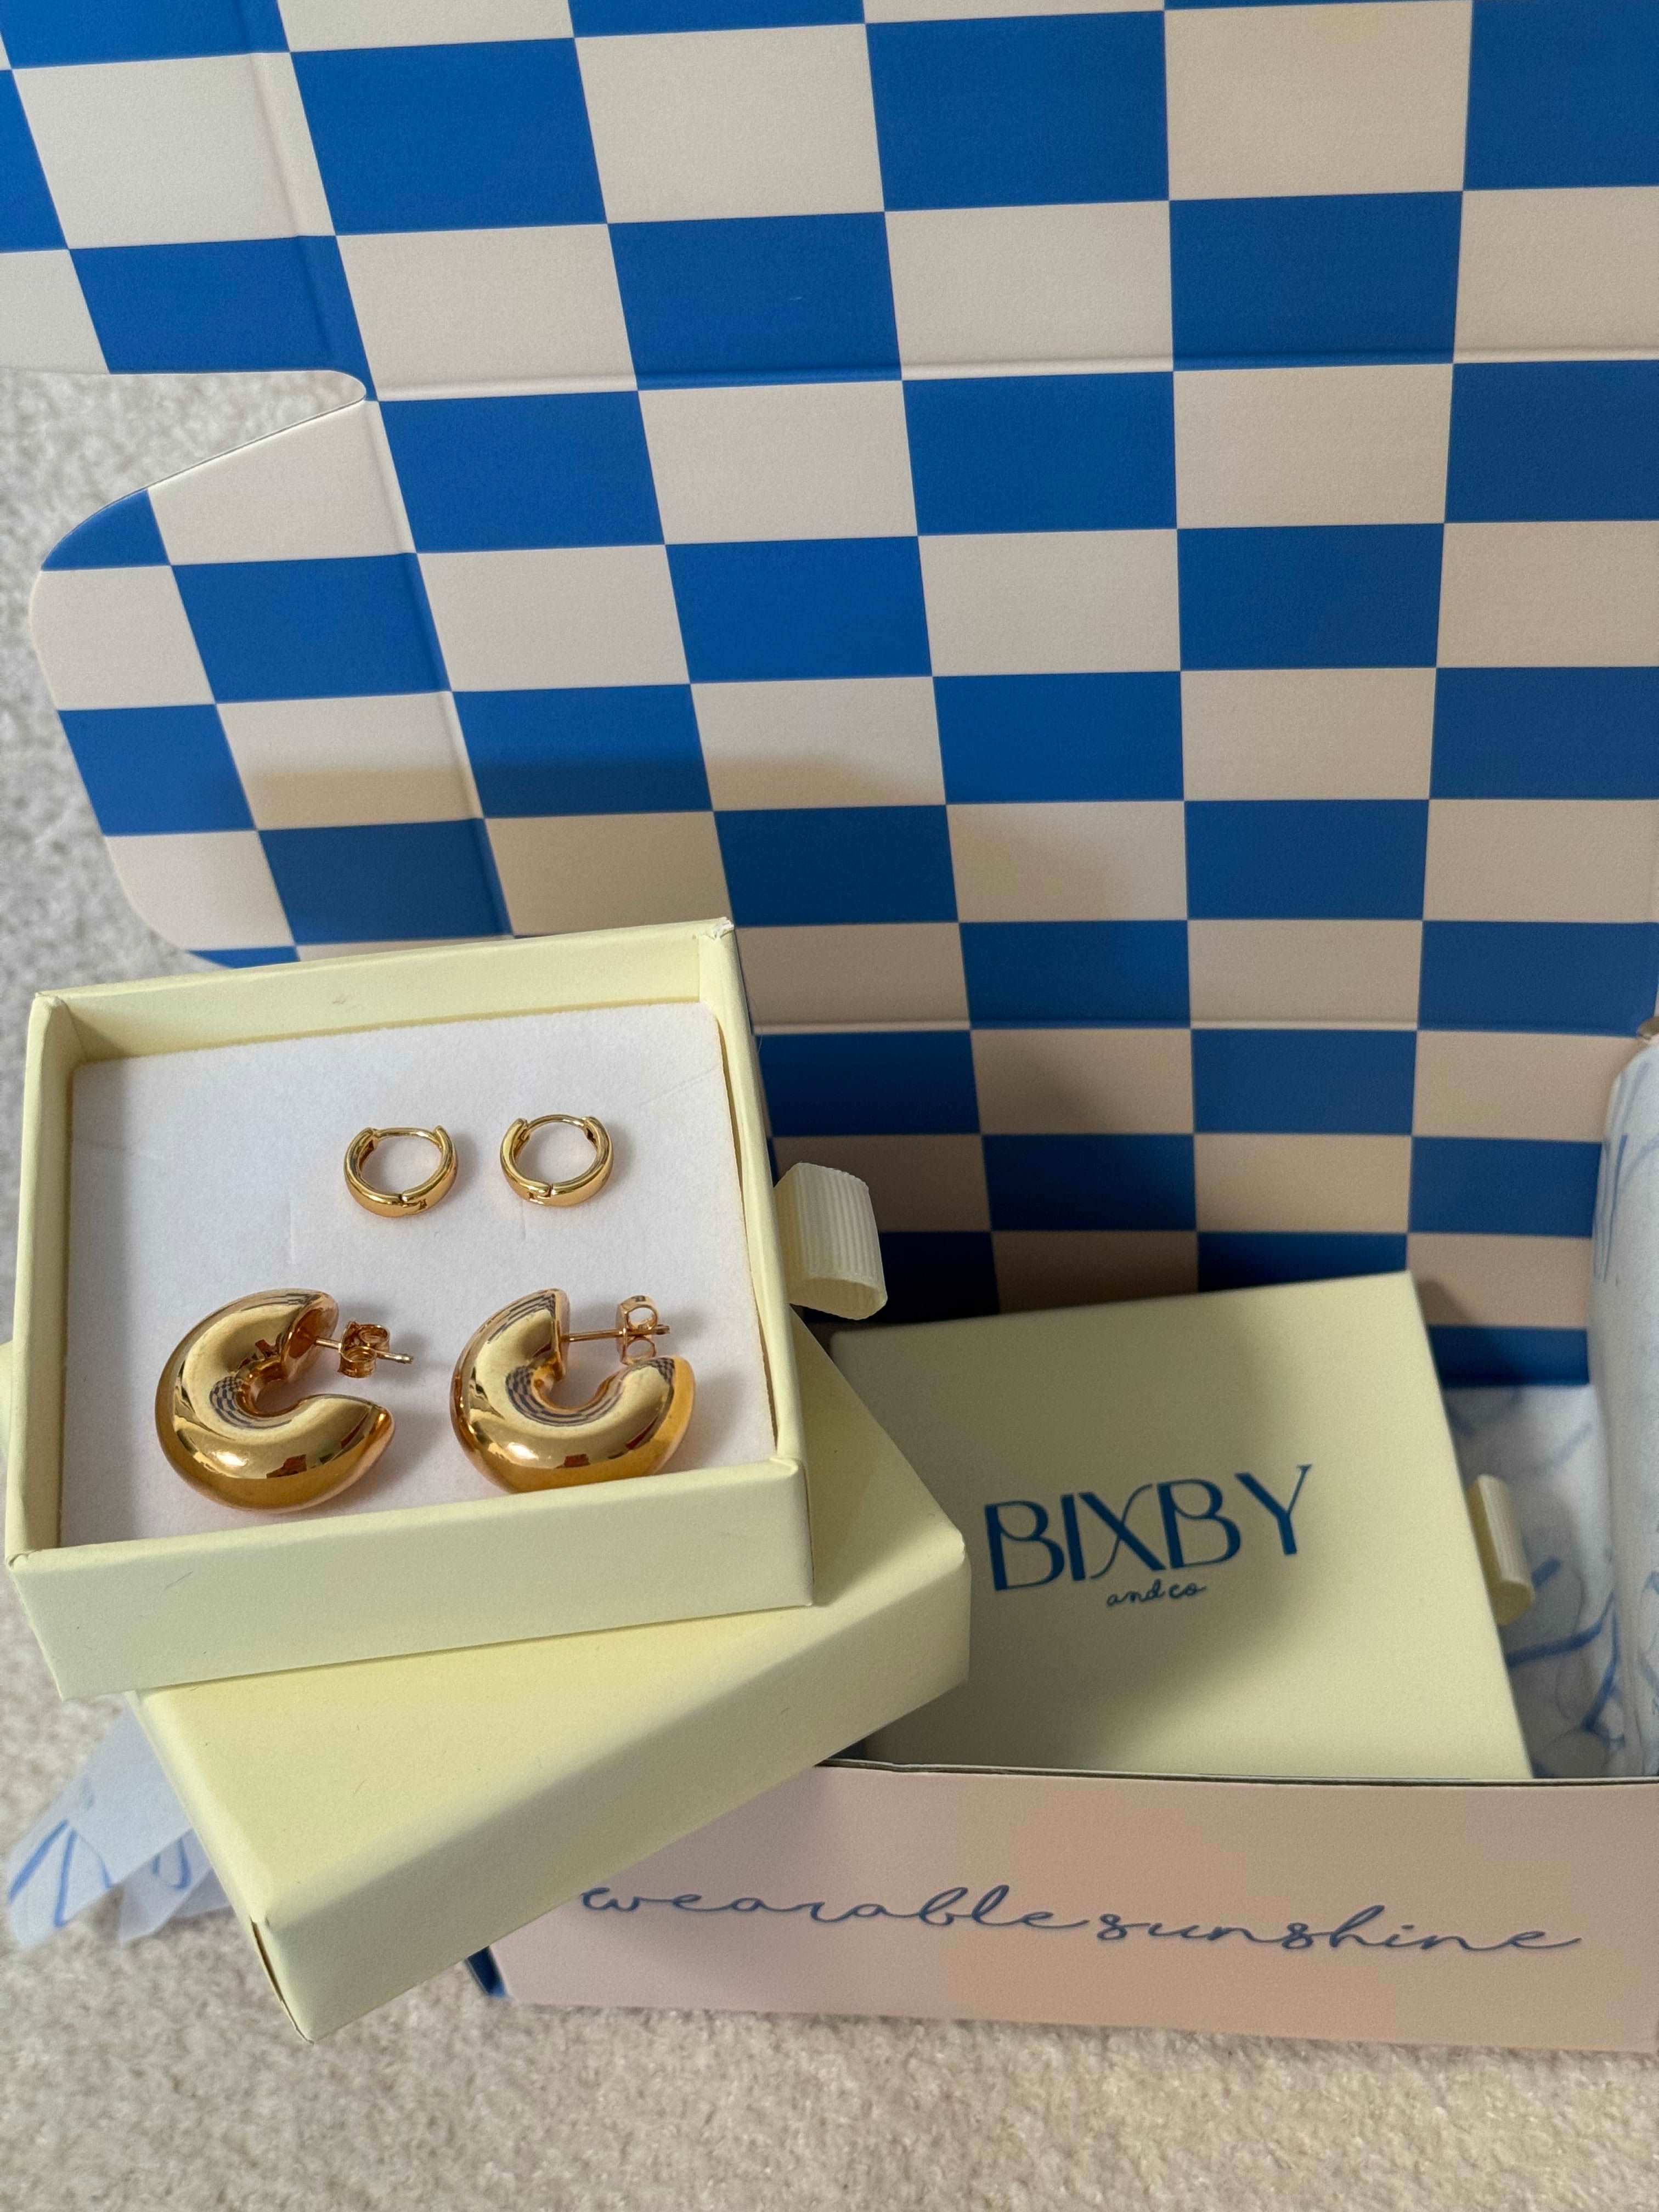 Bixby and Co packaging with gold huggies